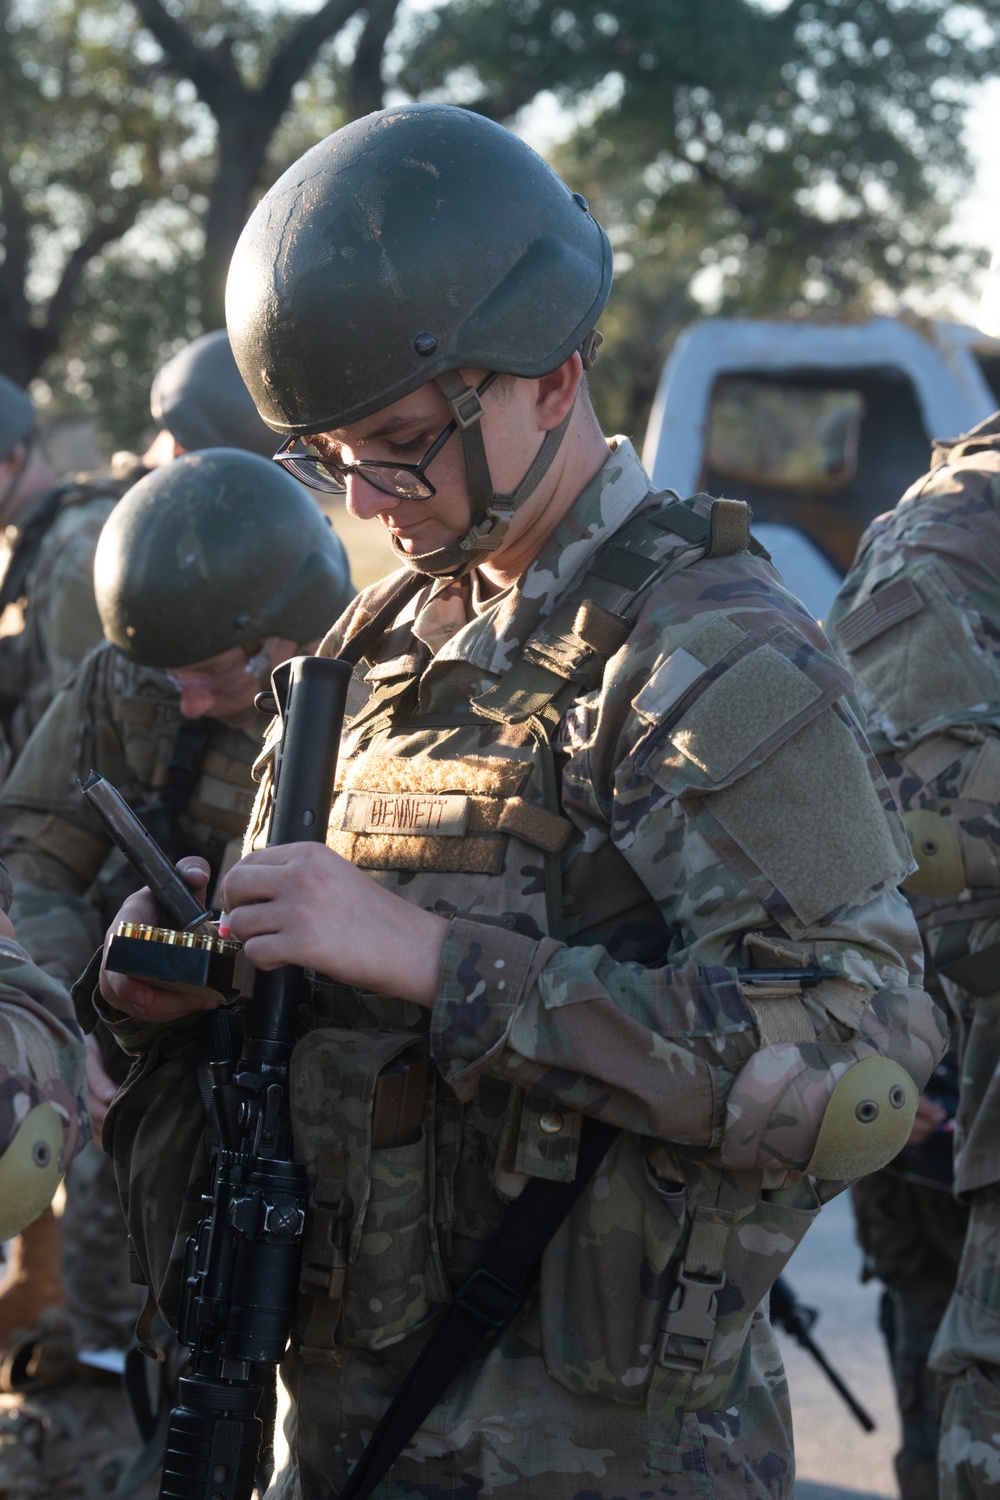 Security Forces Apprentice Course - Field Operations